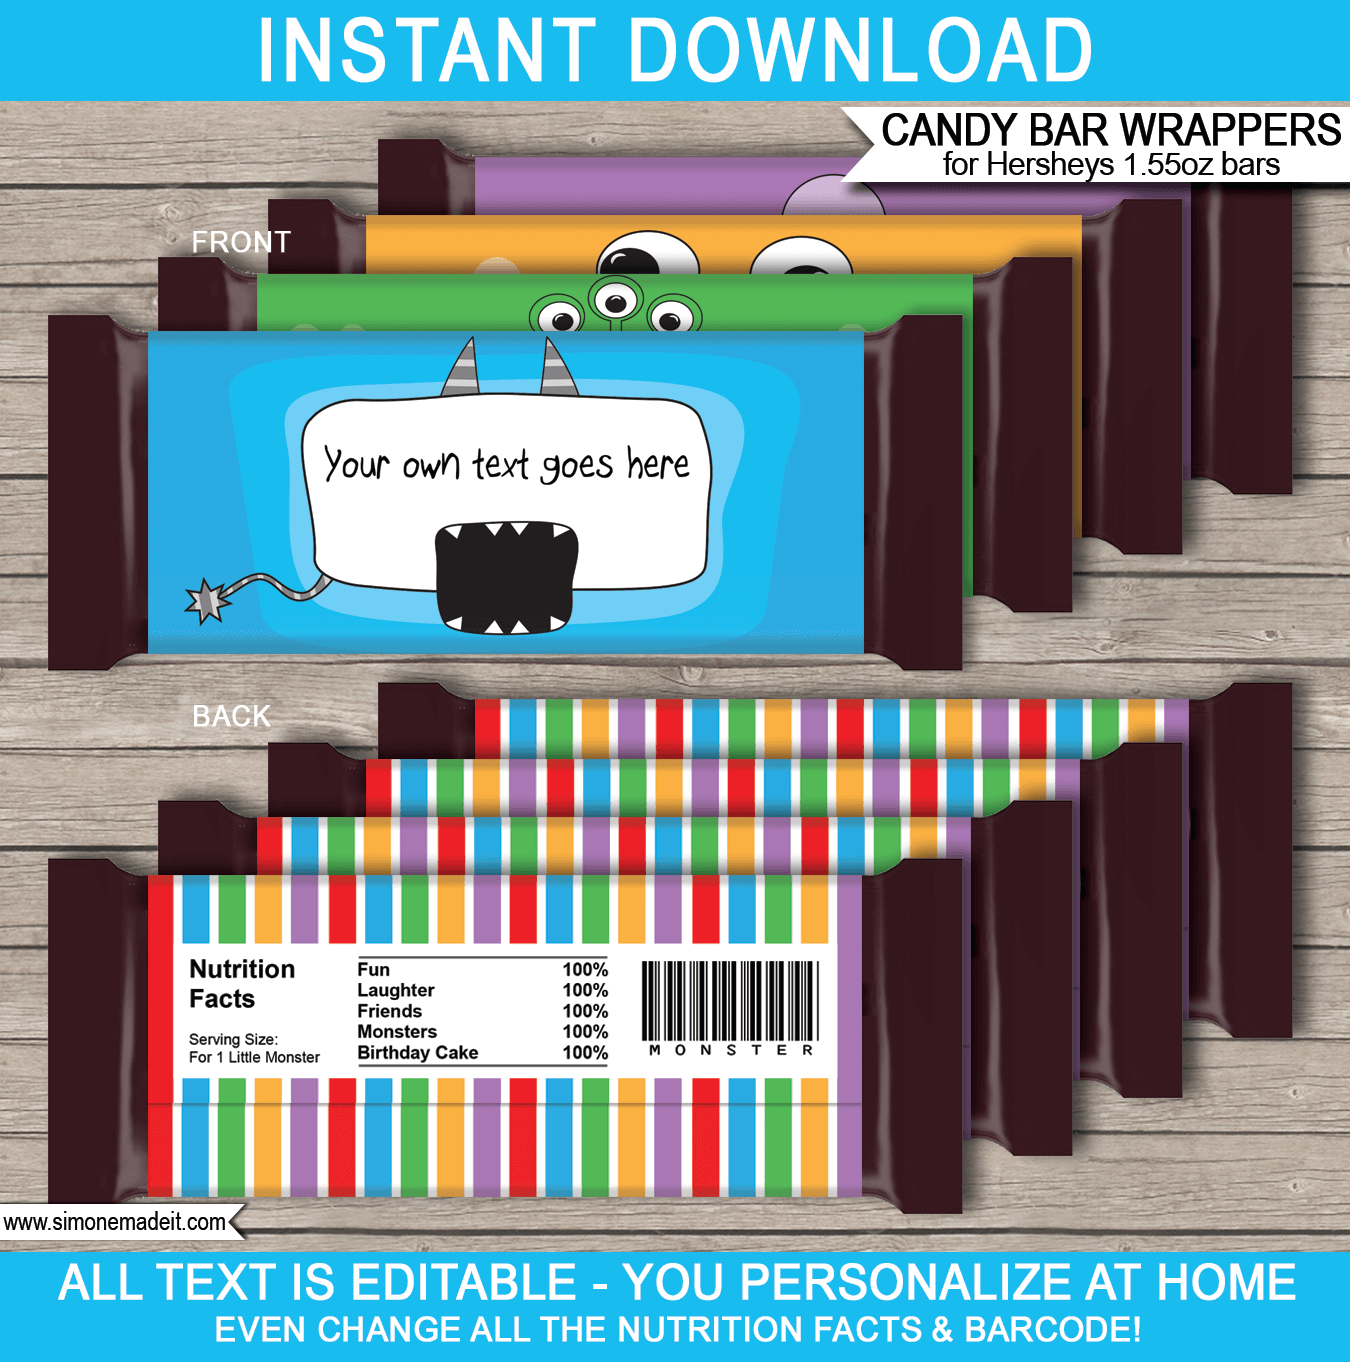 Monster Hershey Candy Bar Wrappers | Birthday Party Favors | Personalized Candy Bars | Editable Template | INSTANT DOWNLOAD $3.00 via simonemadeit.com